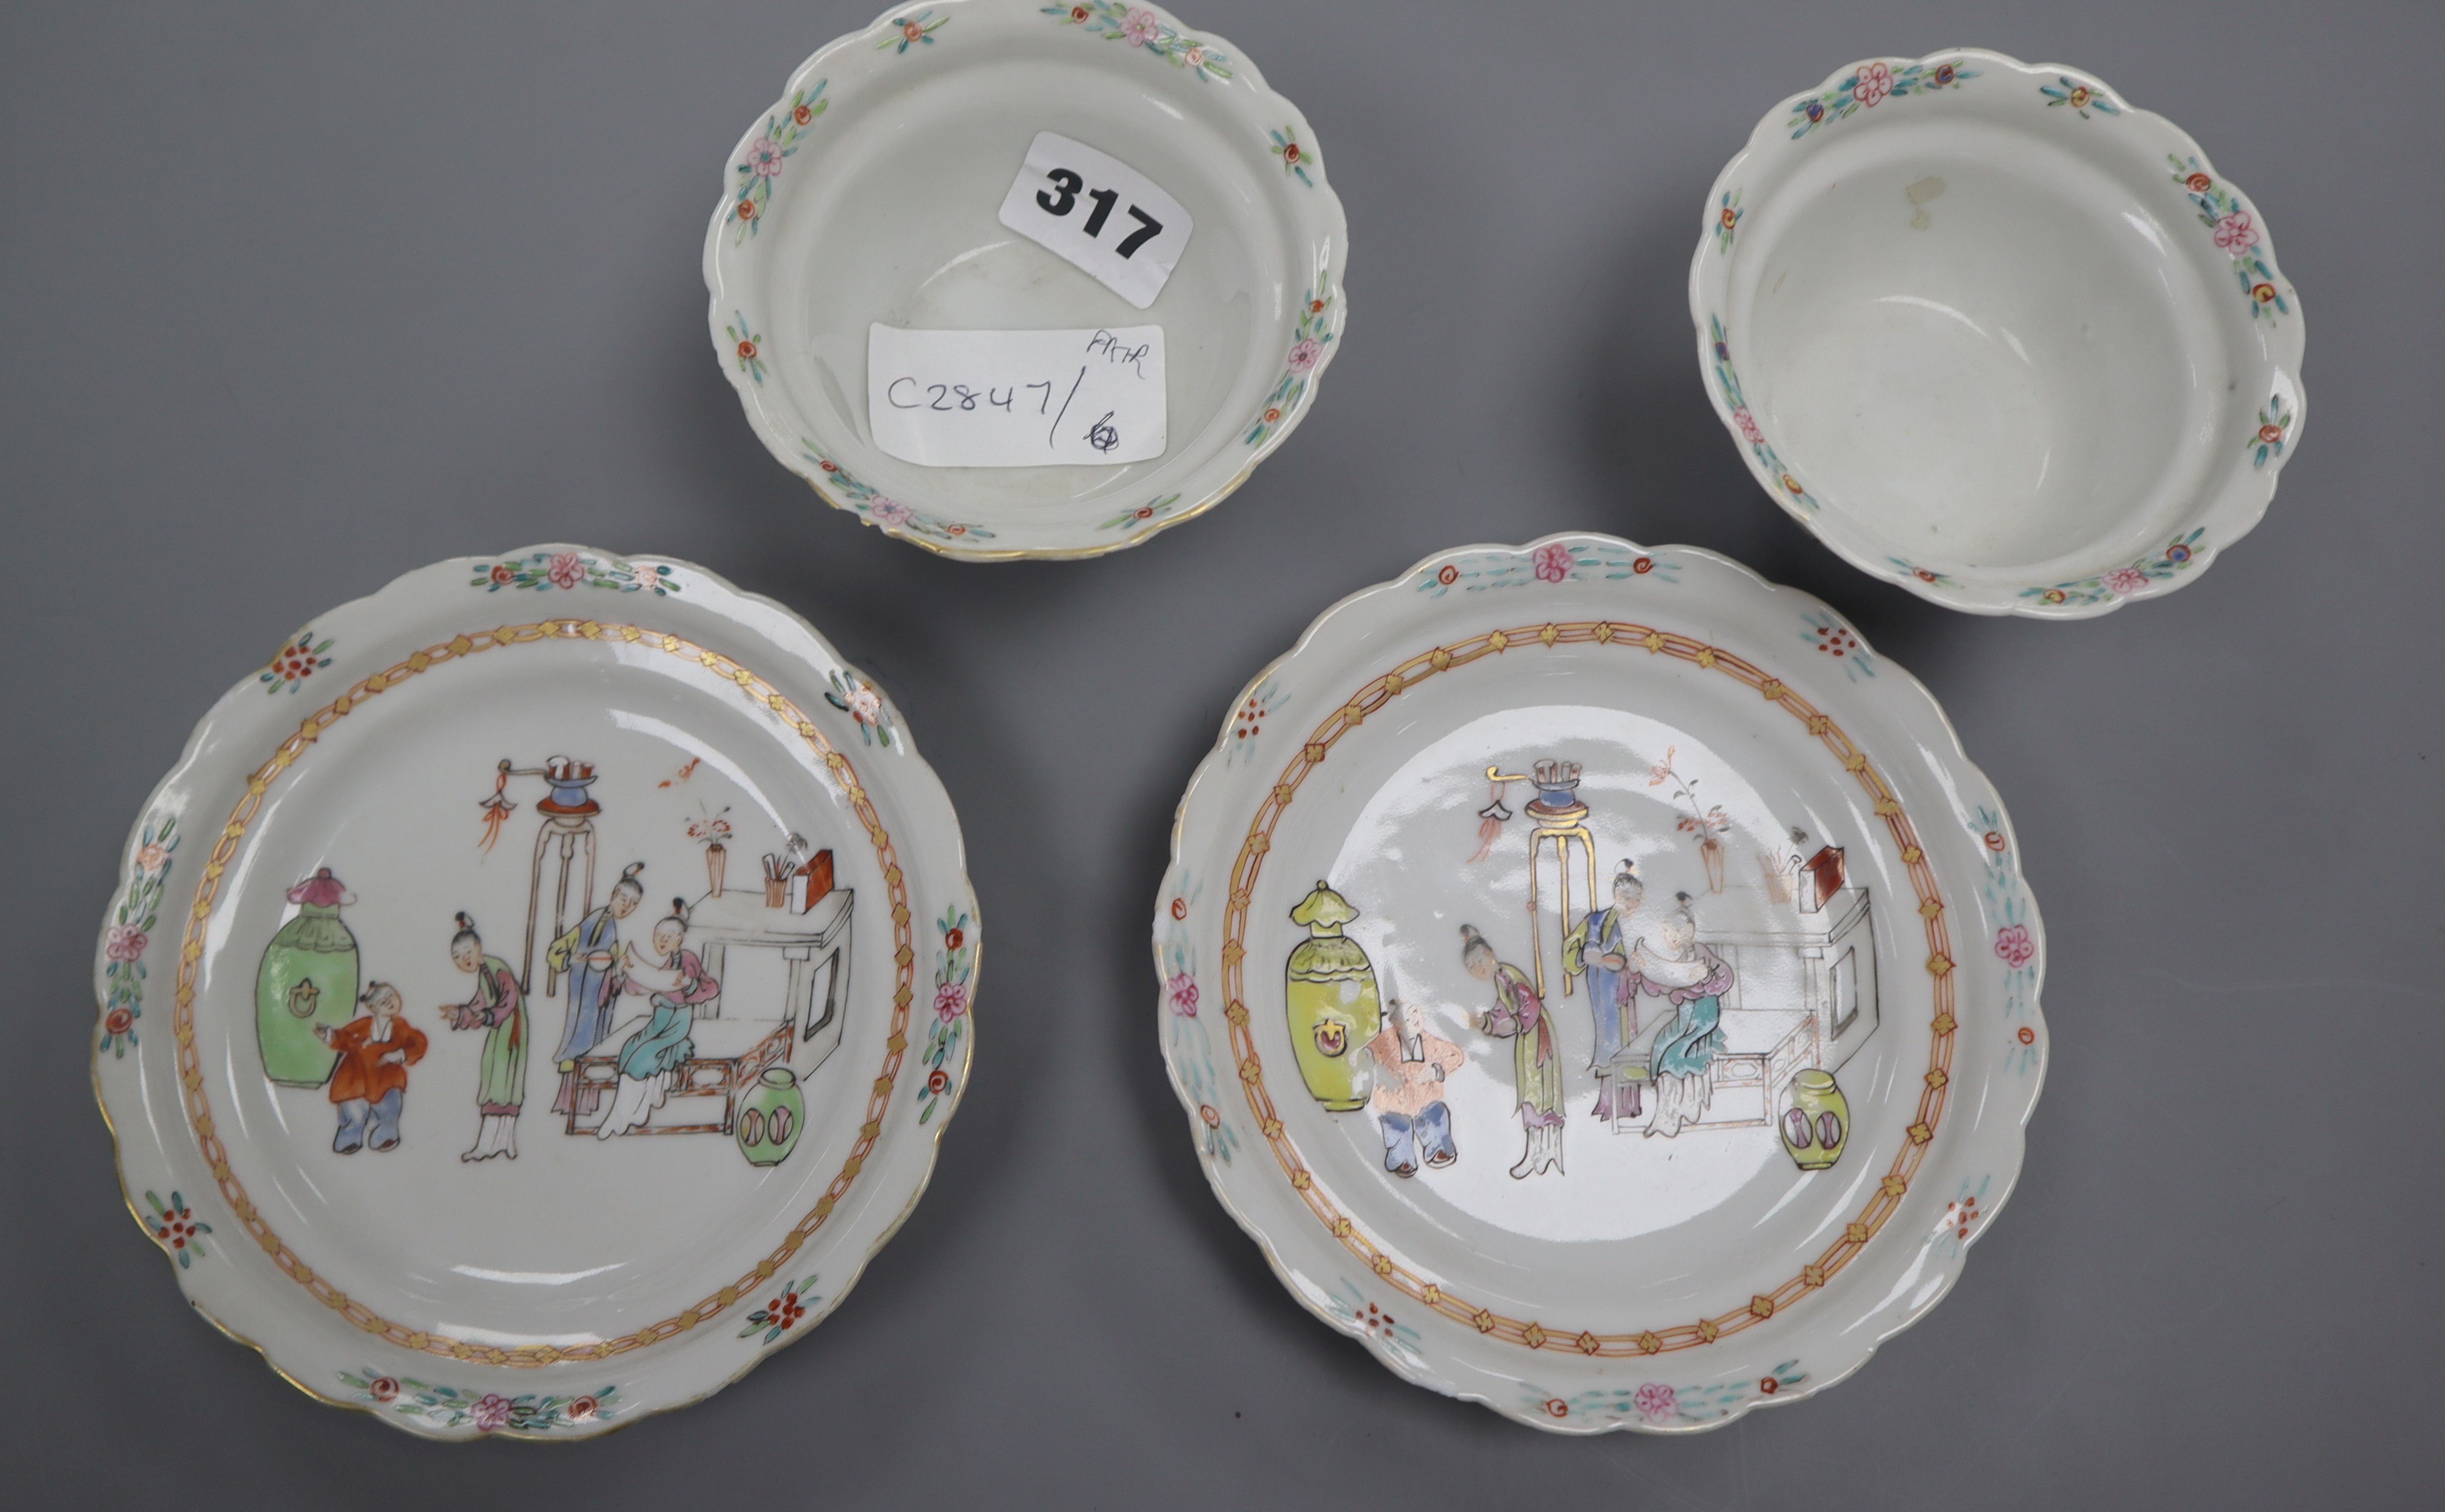 A pair of late 18th century Chinese cups and saucers